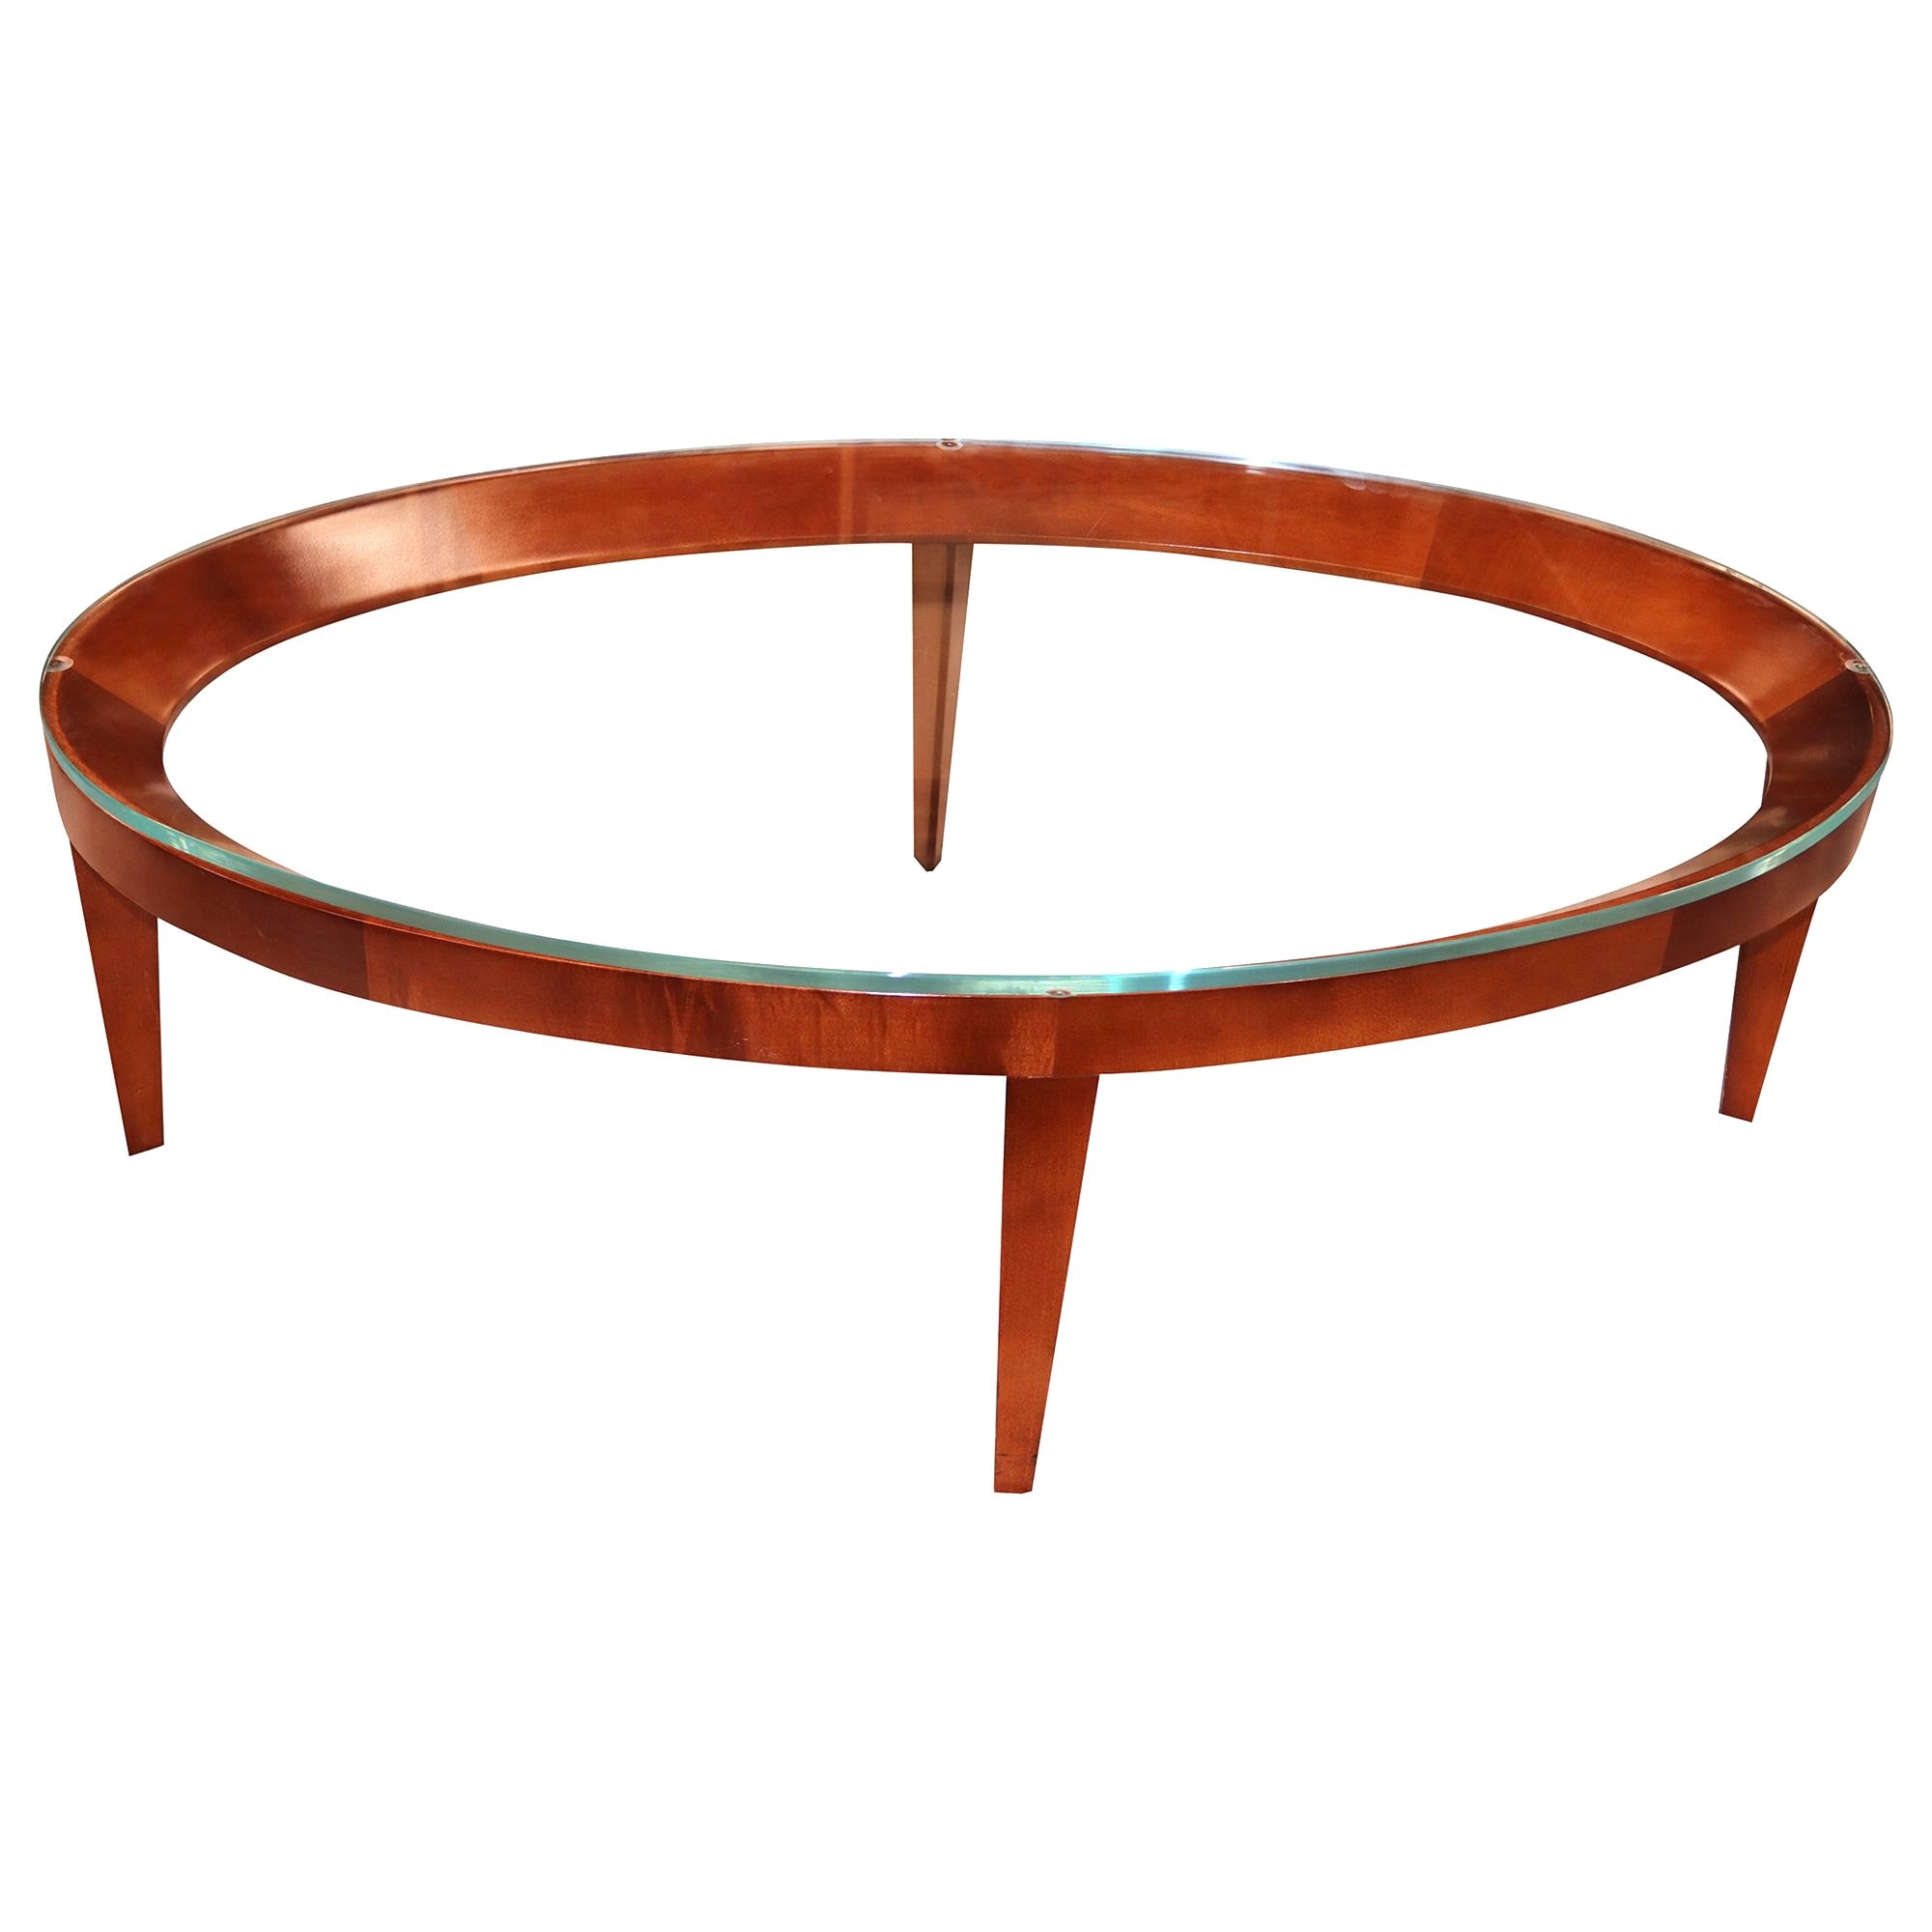 48" Oval Glass Coffee Table, Cherry - Preowned